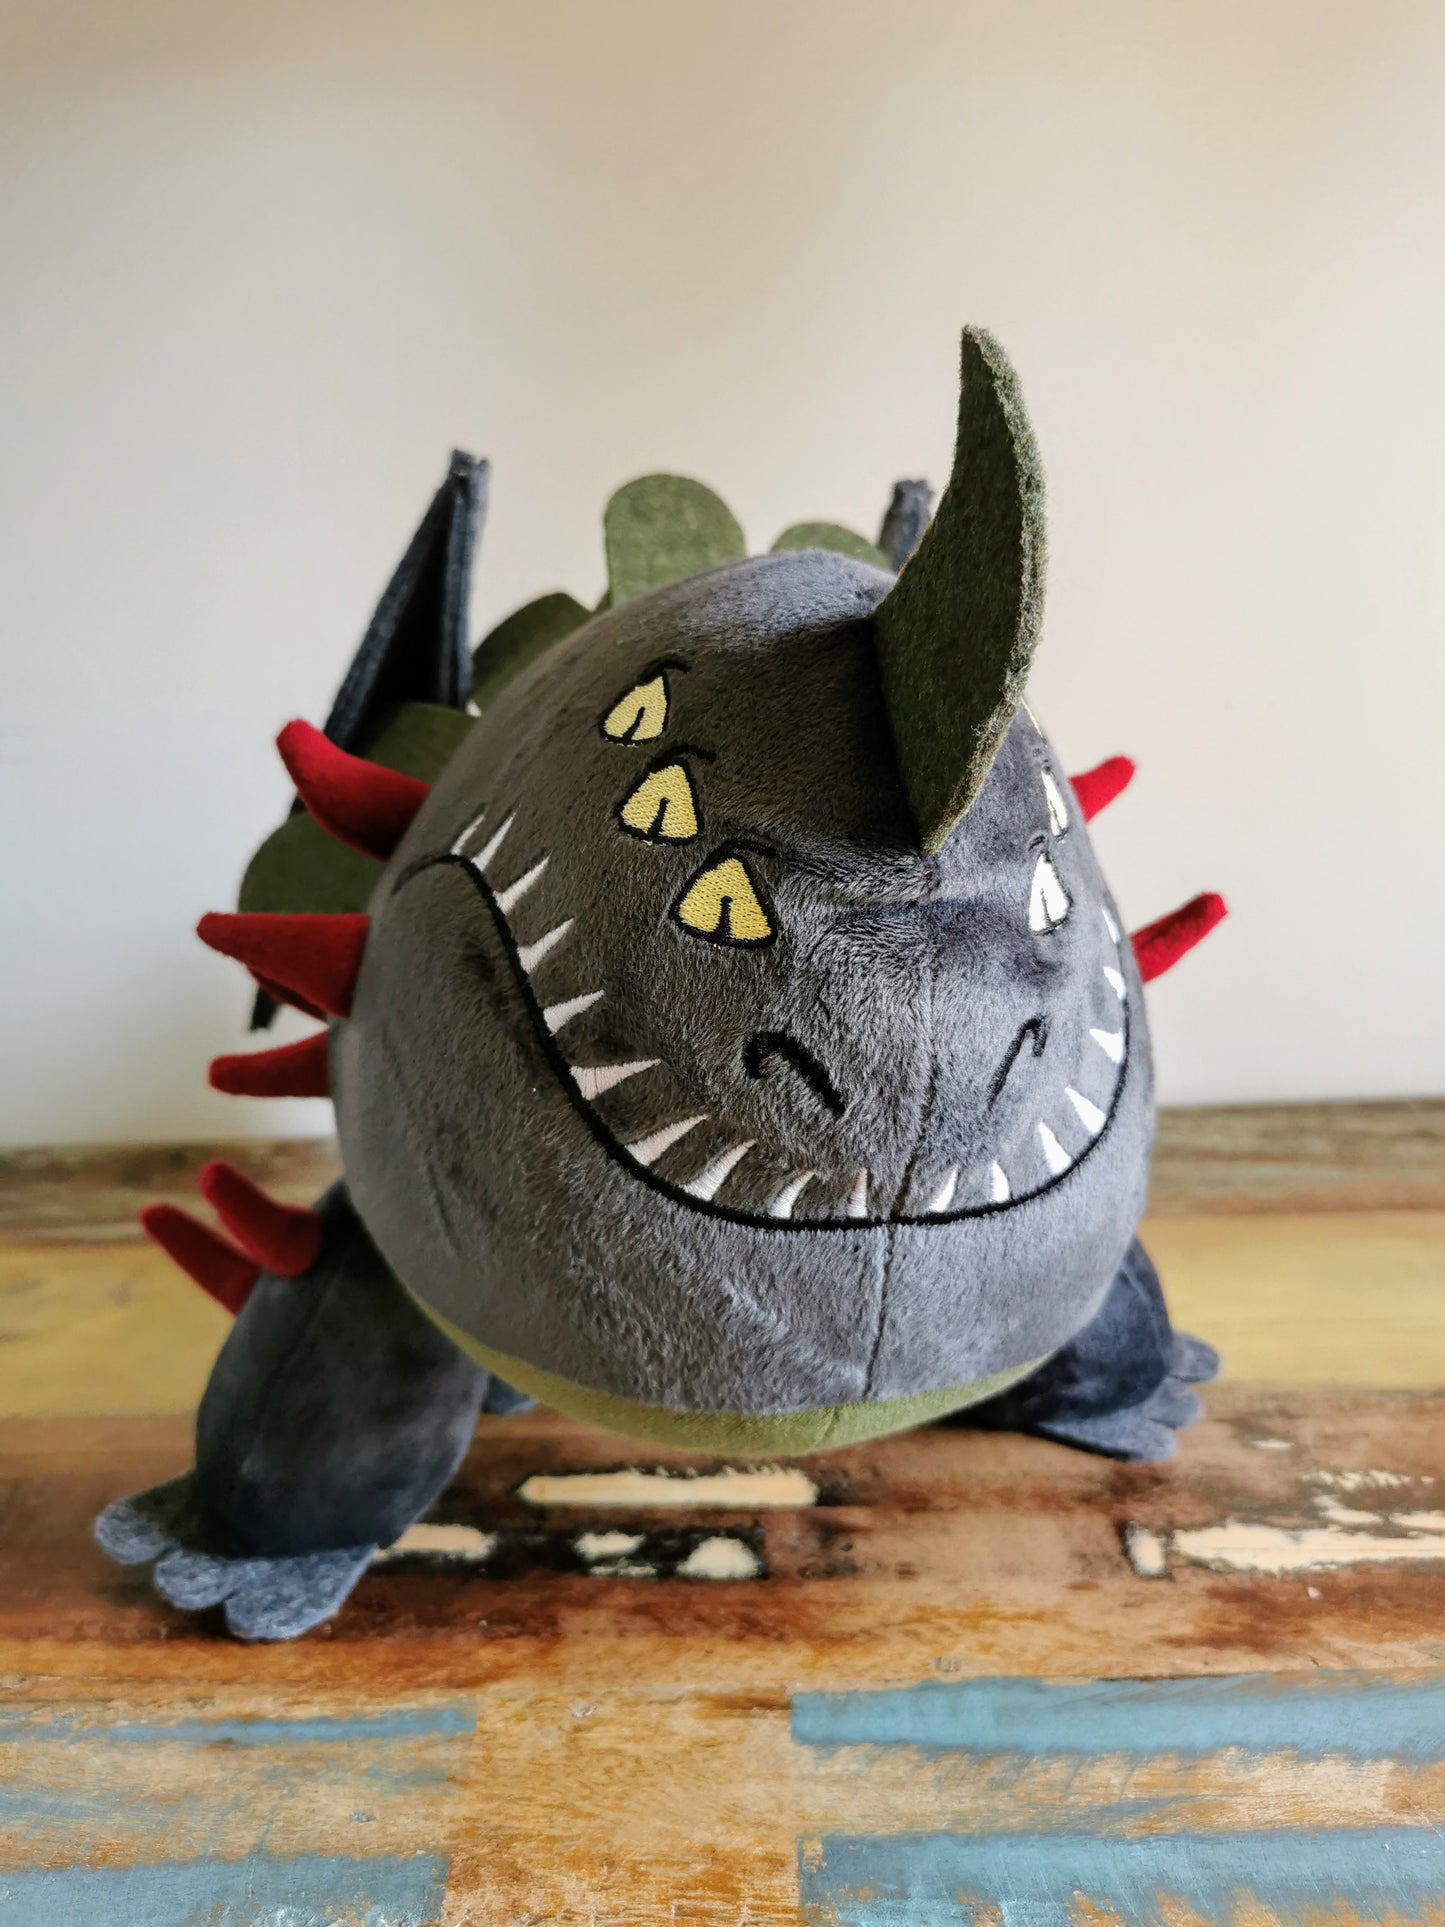 Red Death Dragon plushie, How to Train Your Dragon replica plush, cute plush dragon, custom plush from photo 45cm